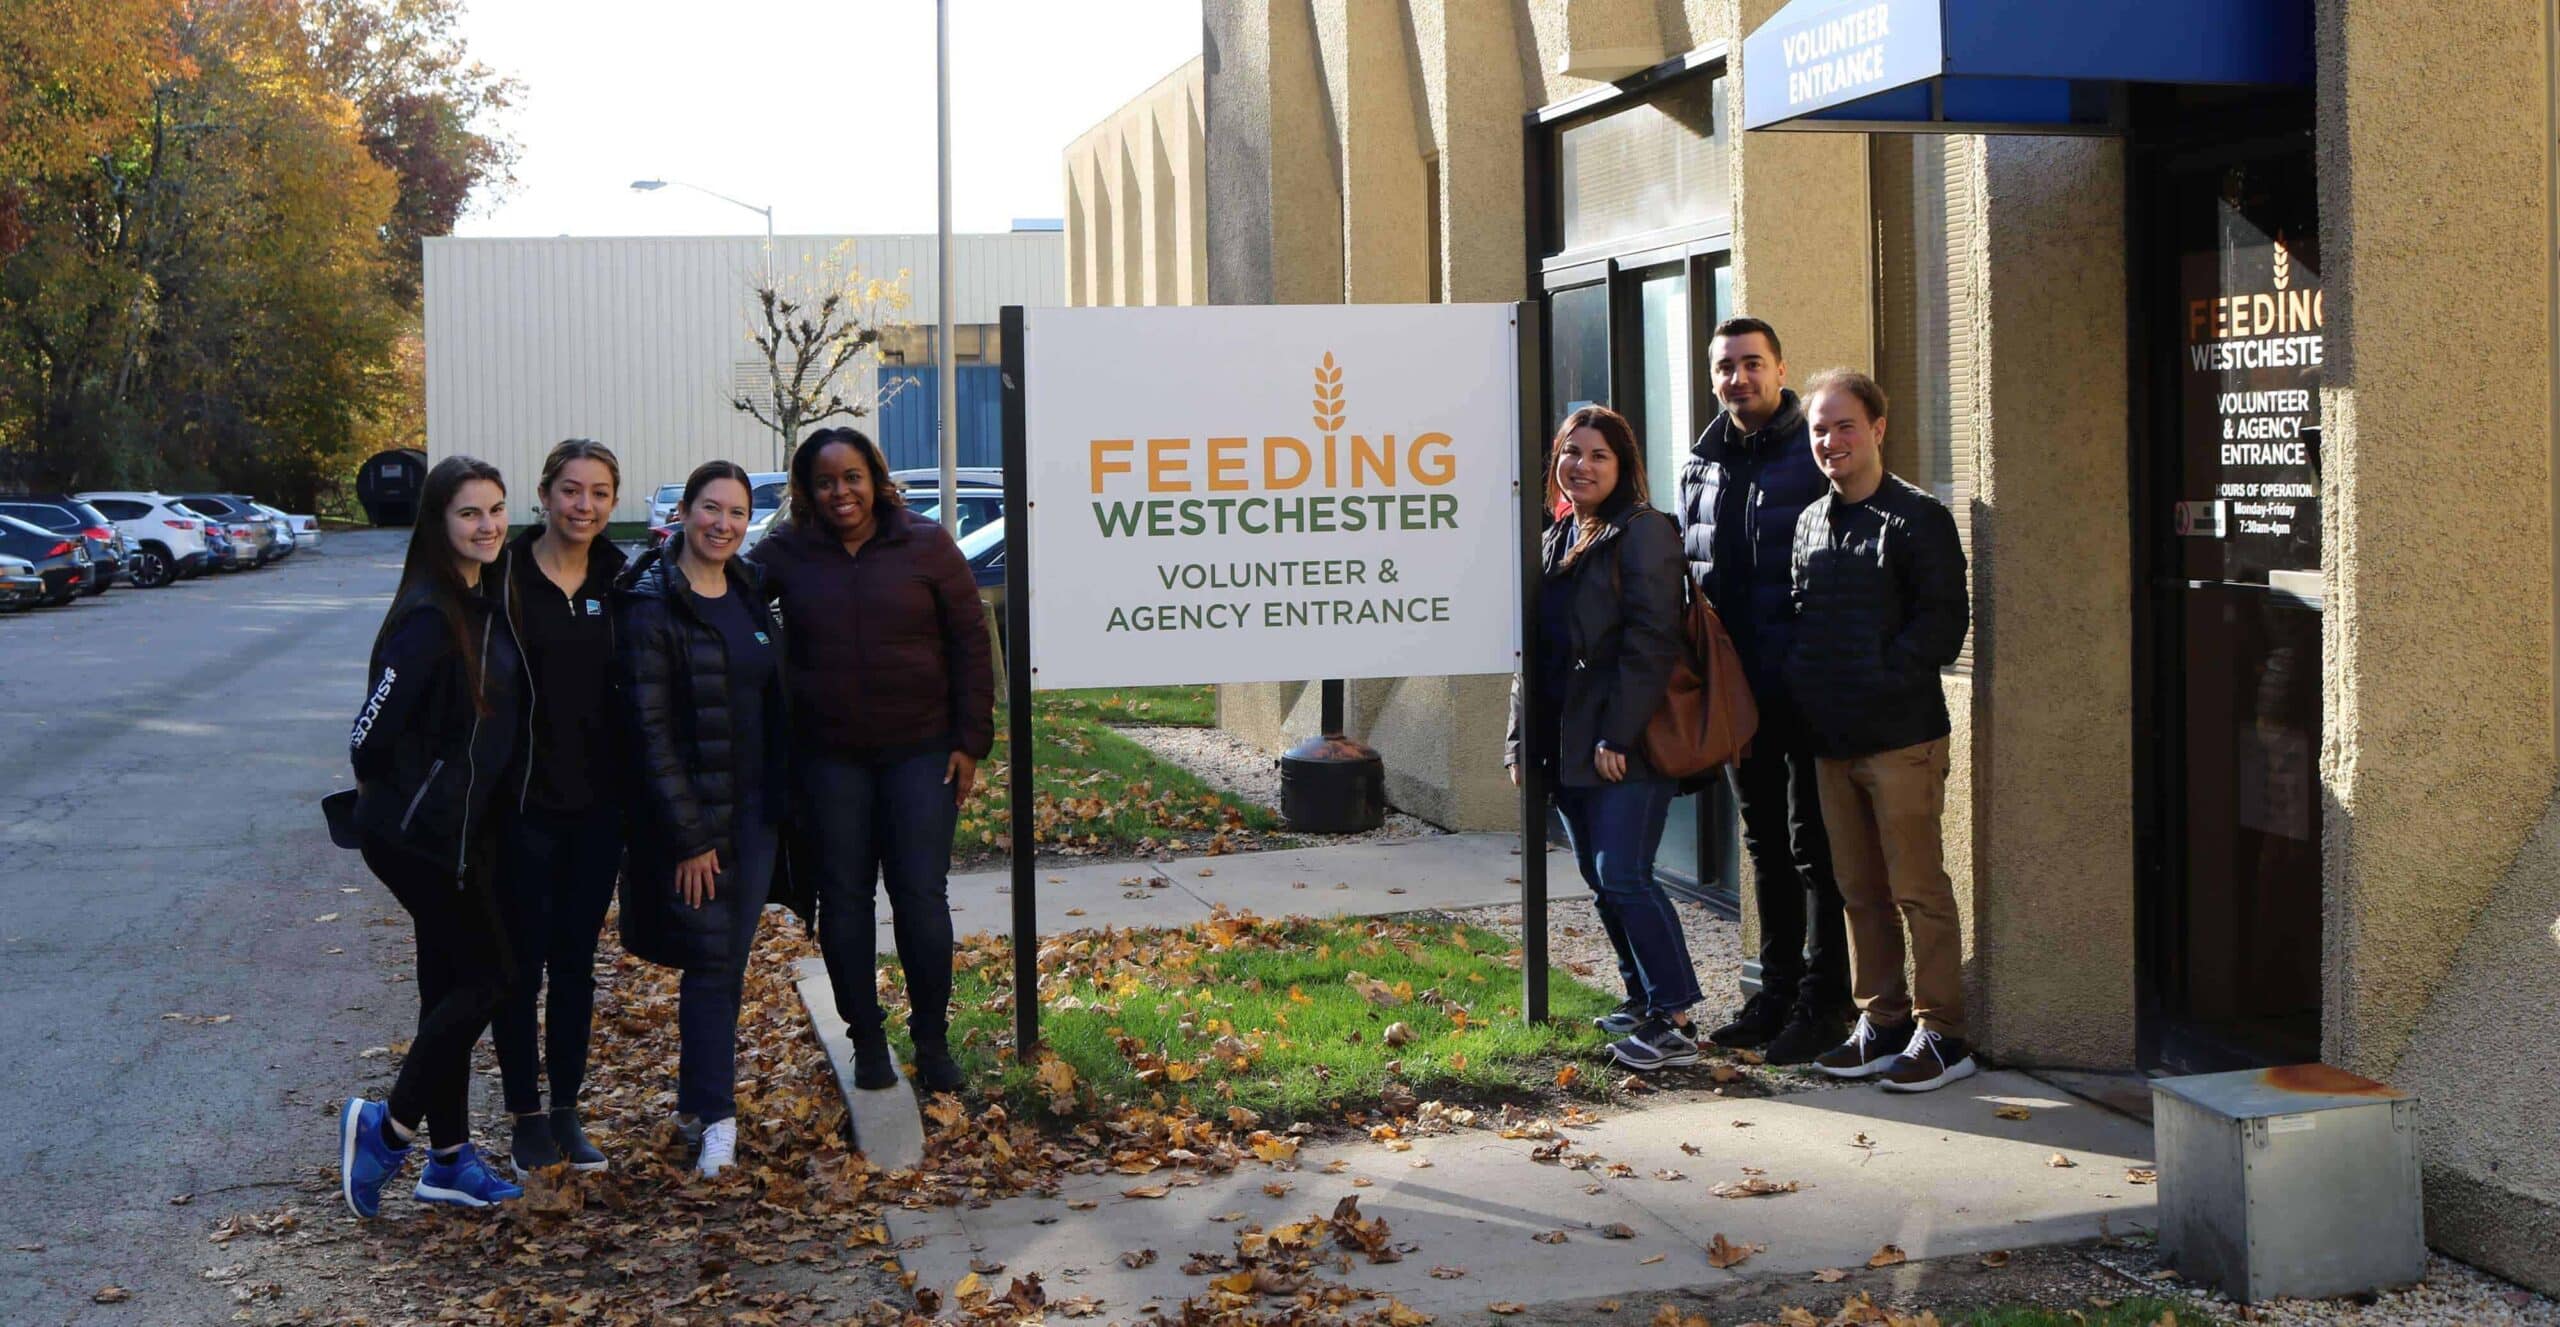 Group of people standing outside of Feeding Westchester